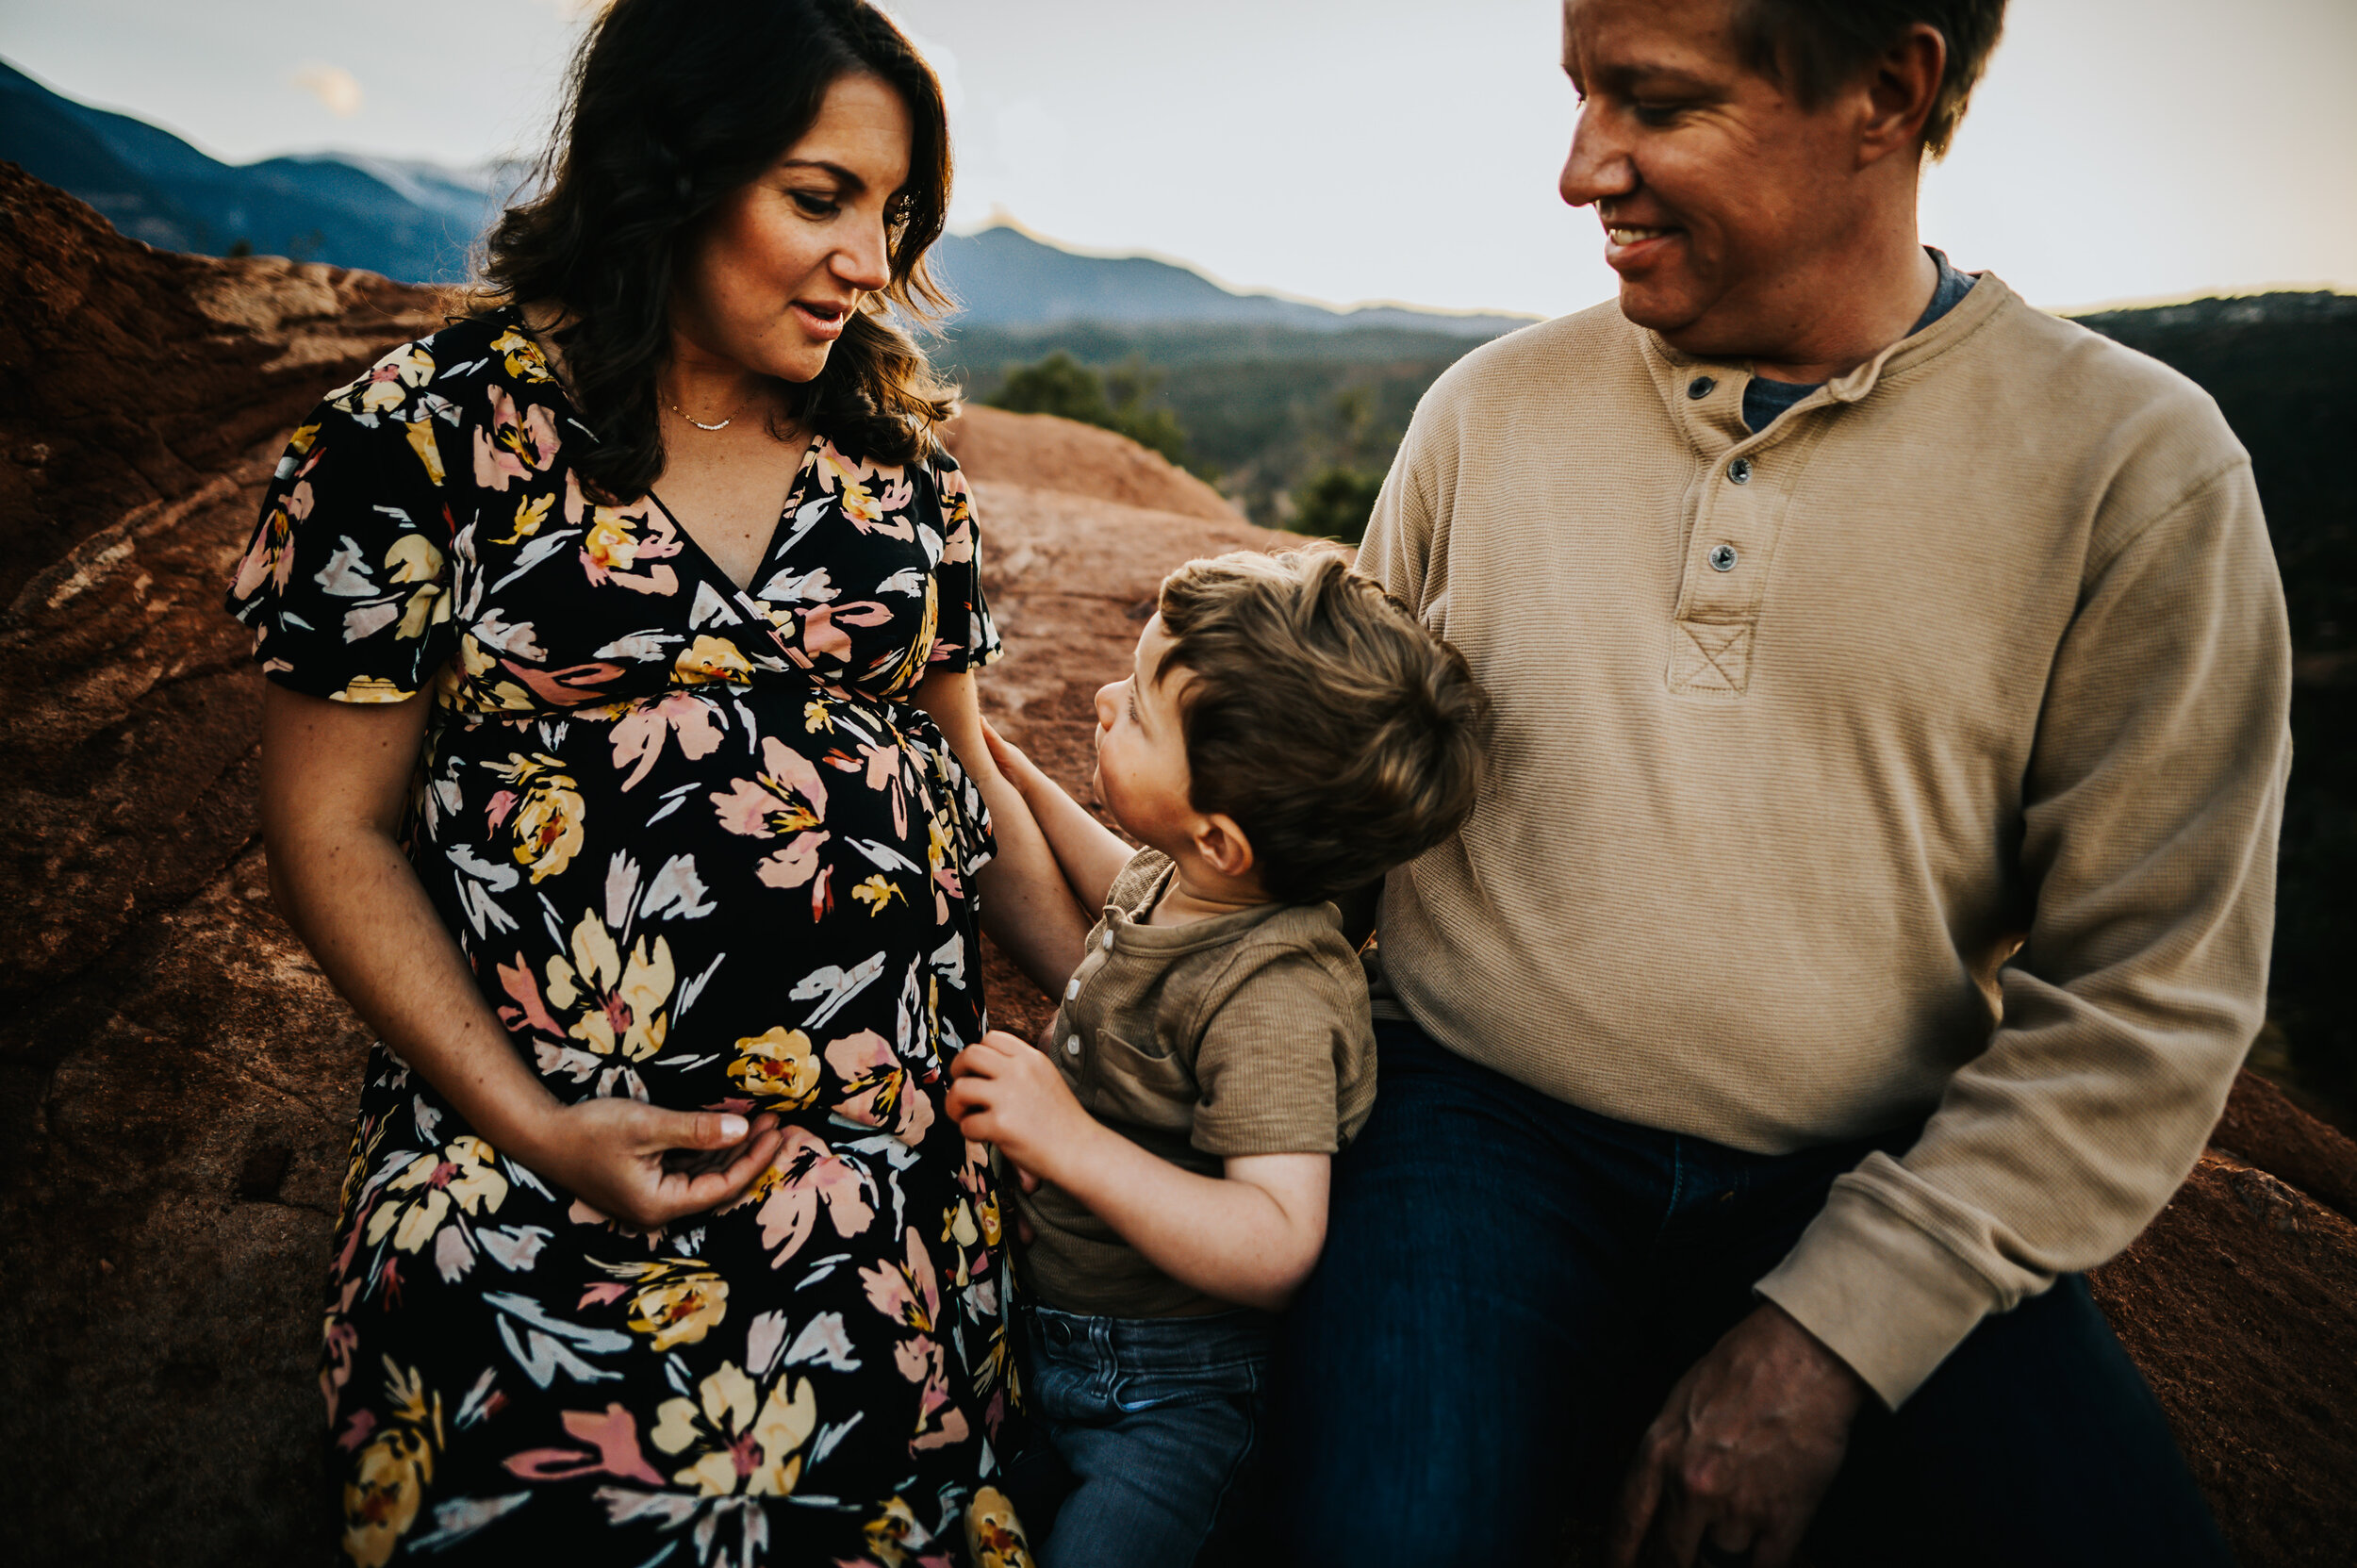 Andrea Grimm Maternity Family Session Colorado Springs Sunset Garden of the Gods Wild Prairie Photography-17-2020.jpg